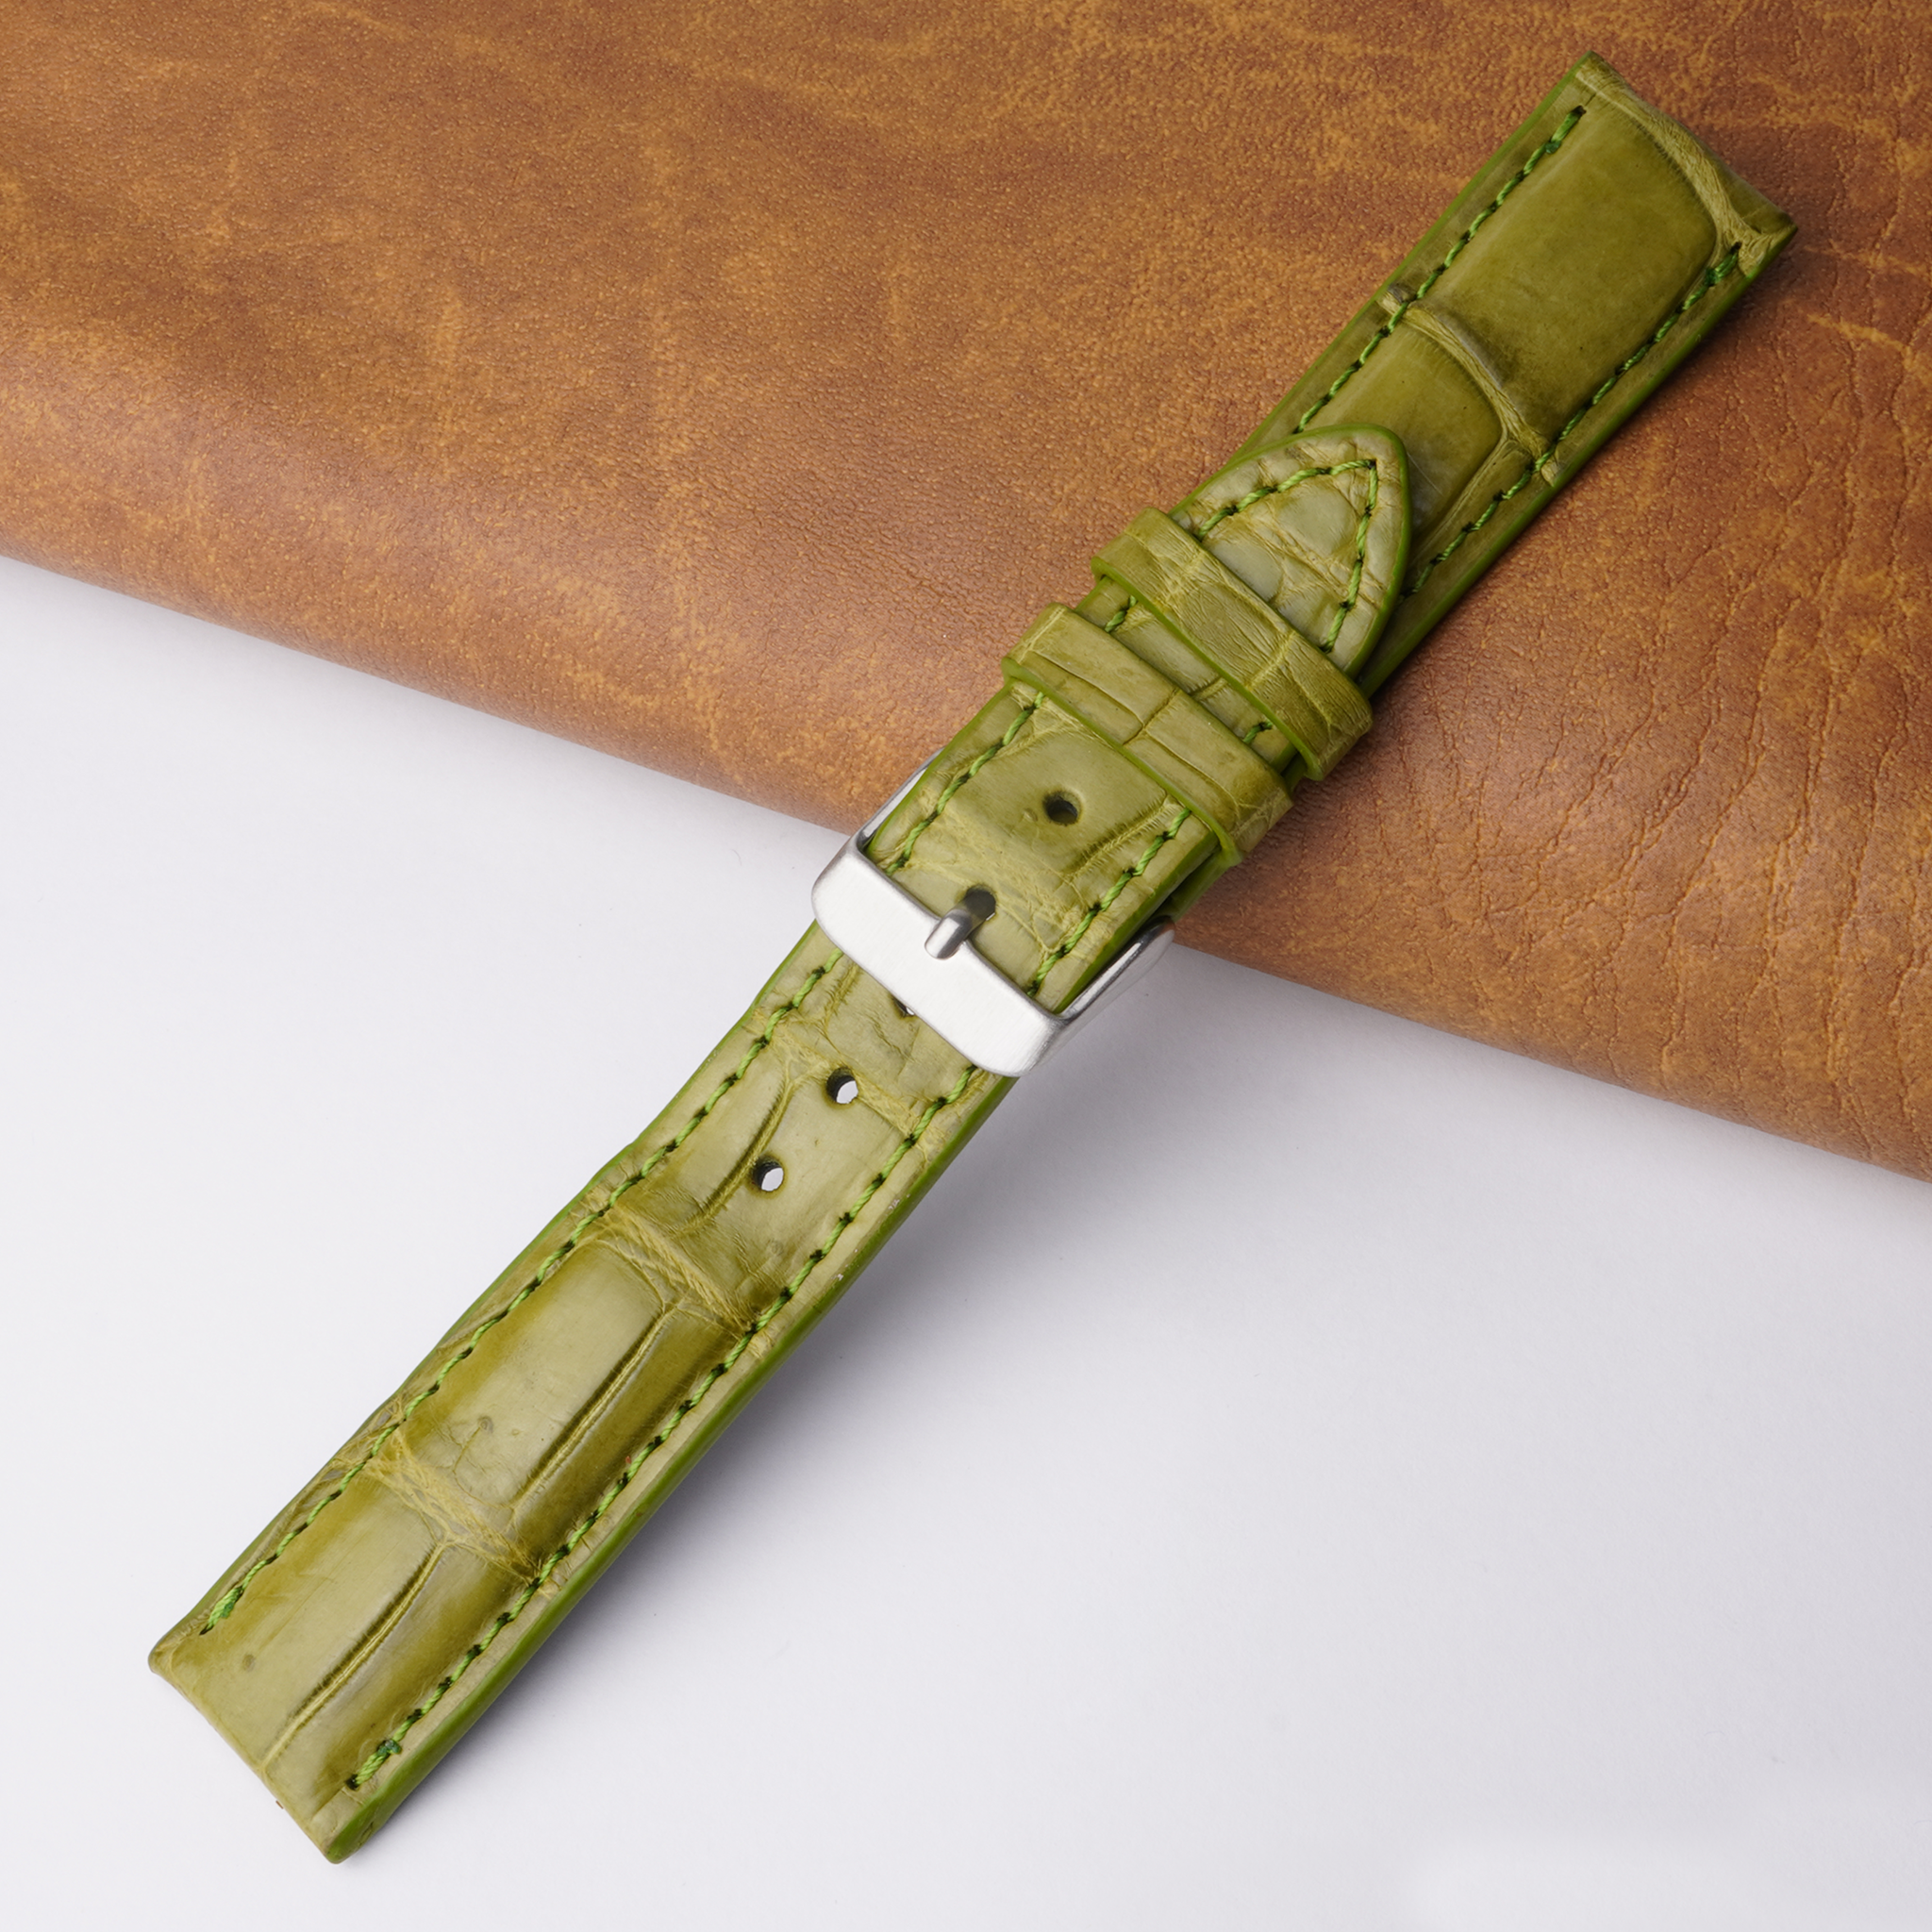 20mm Green Unique Pattern Alligator Leather Watch Band For Men DH-200C